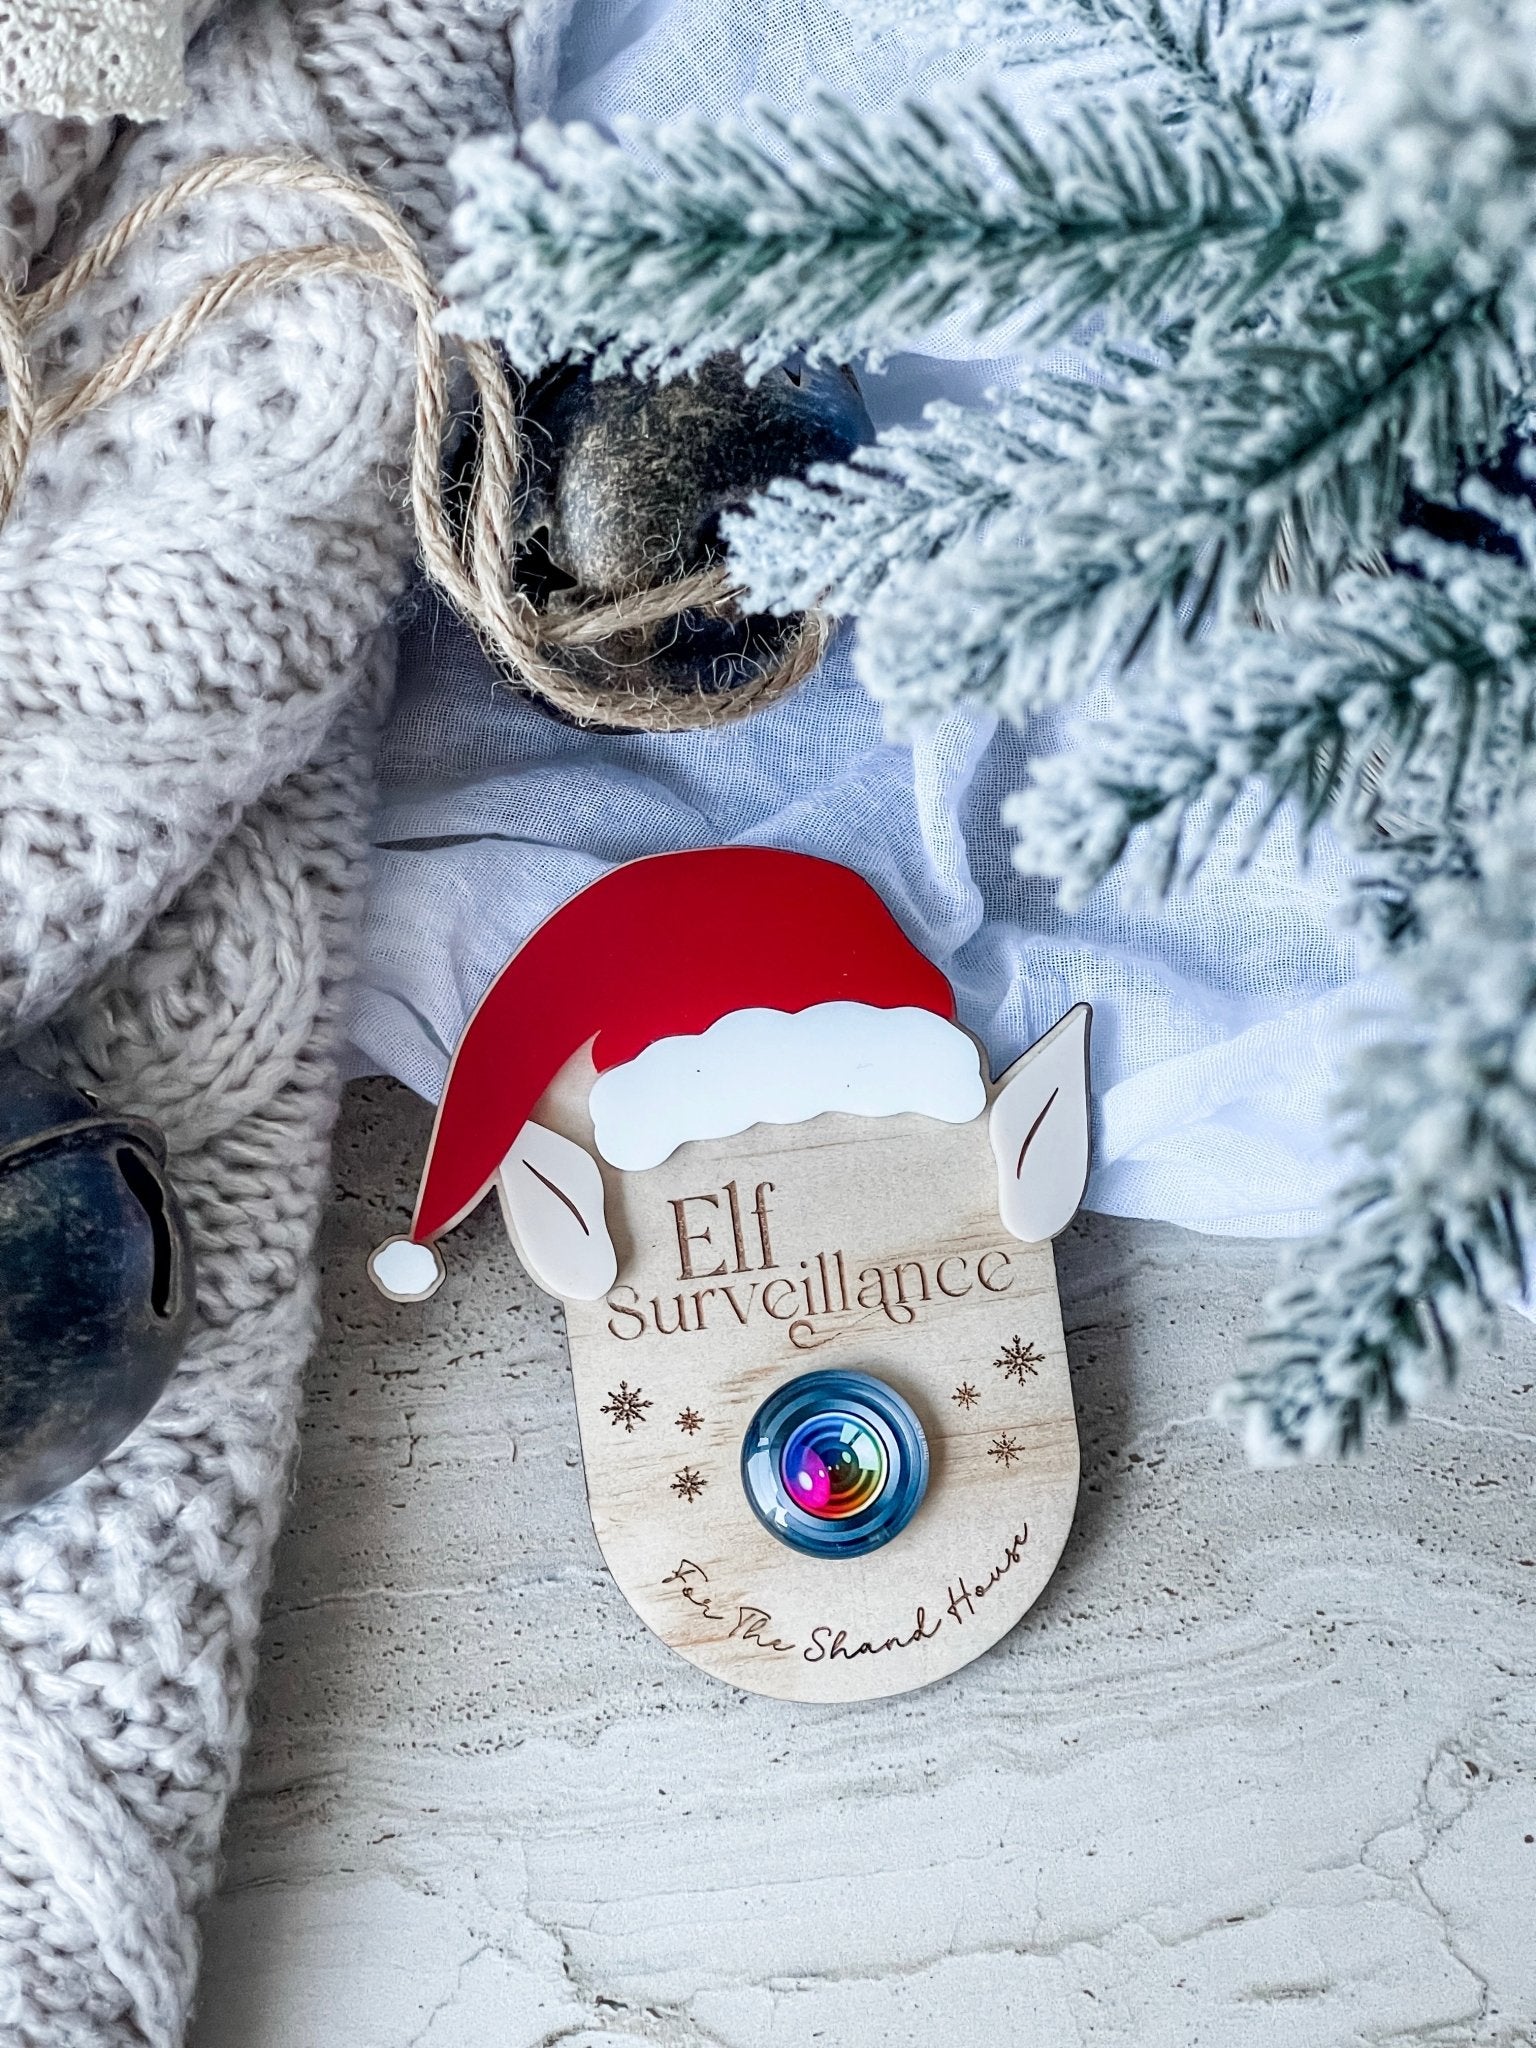 Elf Surveillance - The Humble Gift Co.